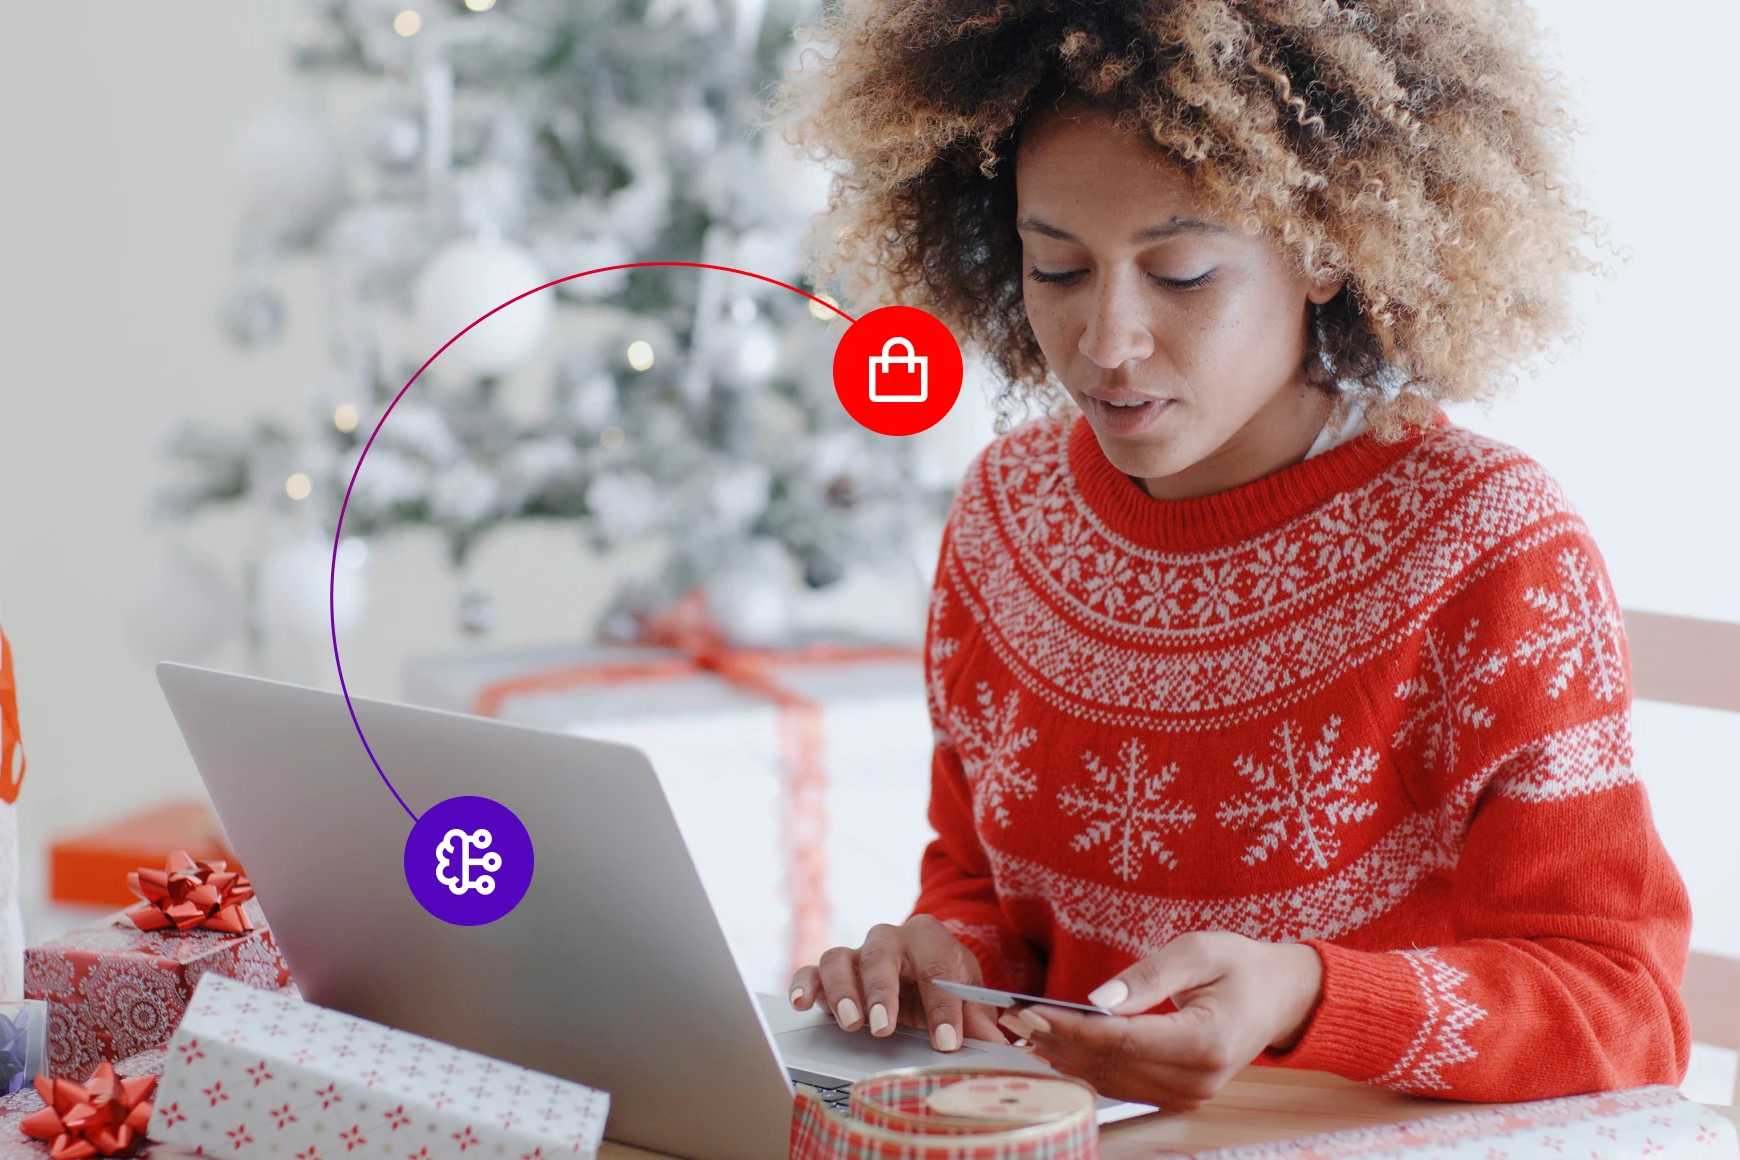 Retailers want the gift of AI shopping tech this holiday season